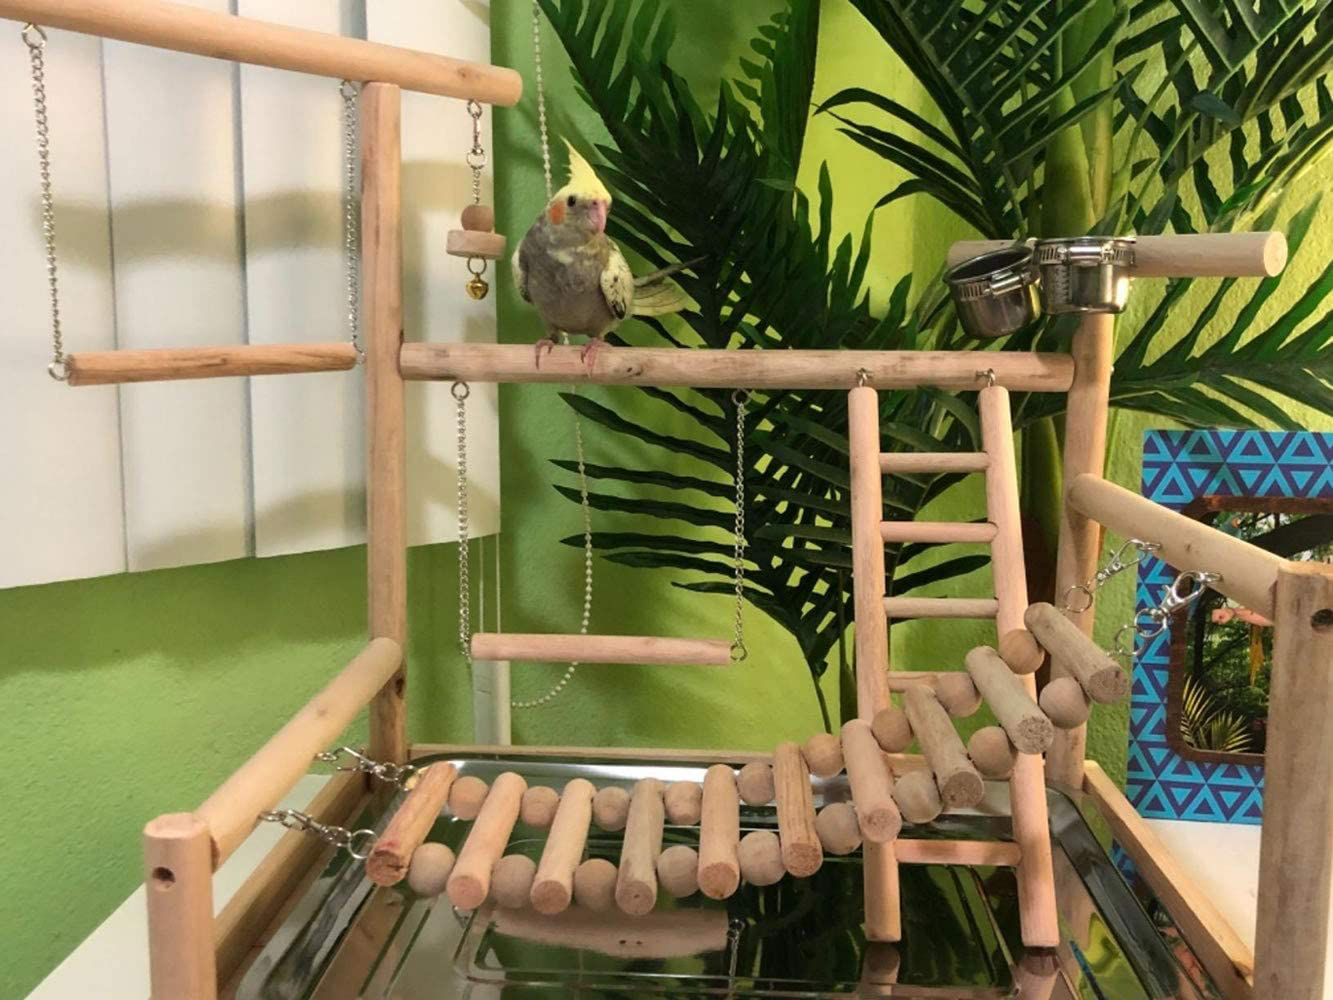 Mrli Pet Bird Perch Platform Stand Wood for Small Animals Parrot Parakeet Conure Cockatiel Budgie Gerbil Rat Mouse Chinchilla Hamster Cage Accessories Exercise Toys Sector Animals & Pet Supplies > Pet Supplies > Bird Supplies > Bird Gyms & Playstands Mrli Pet   